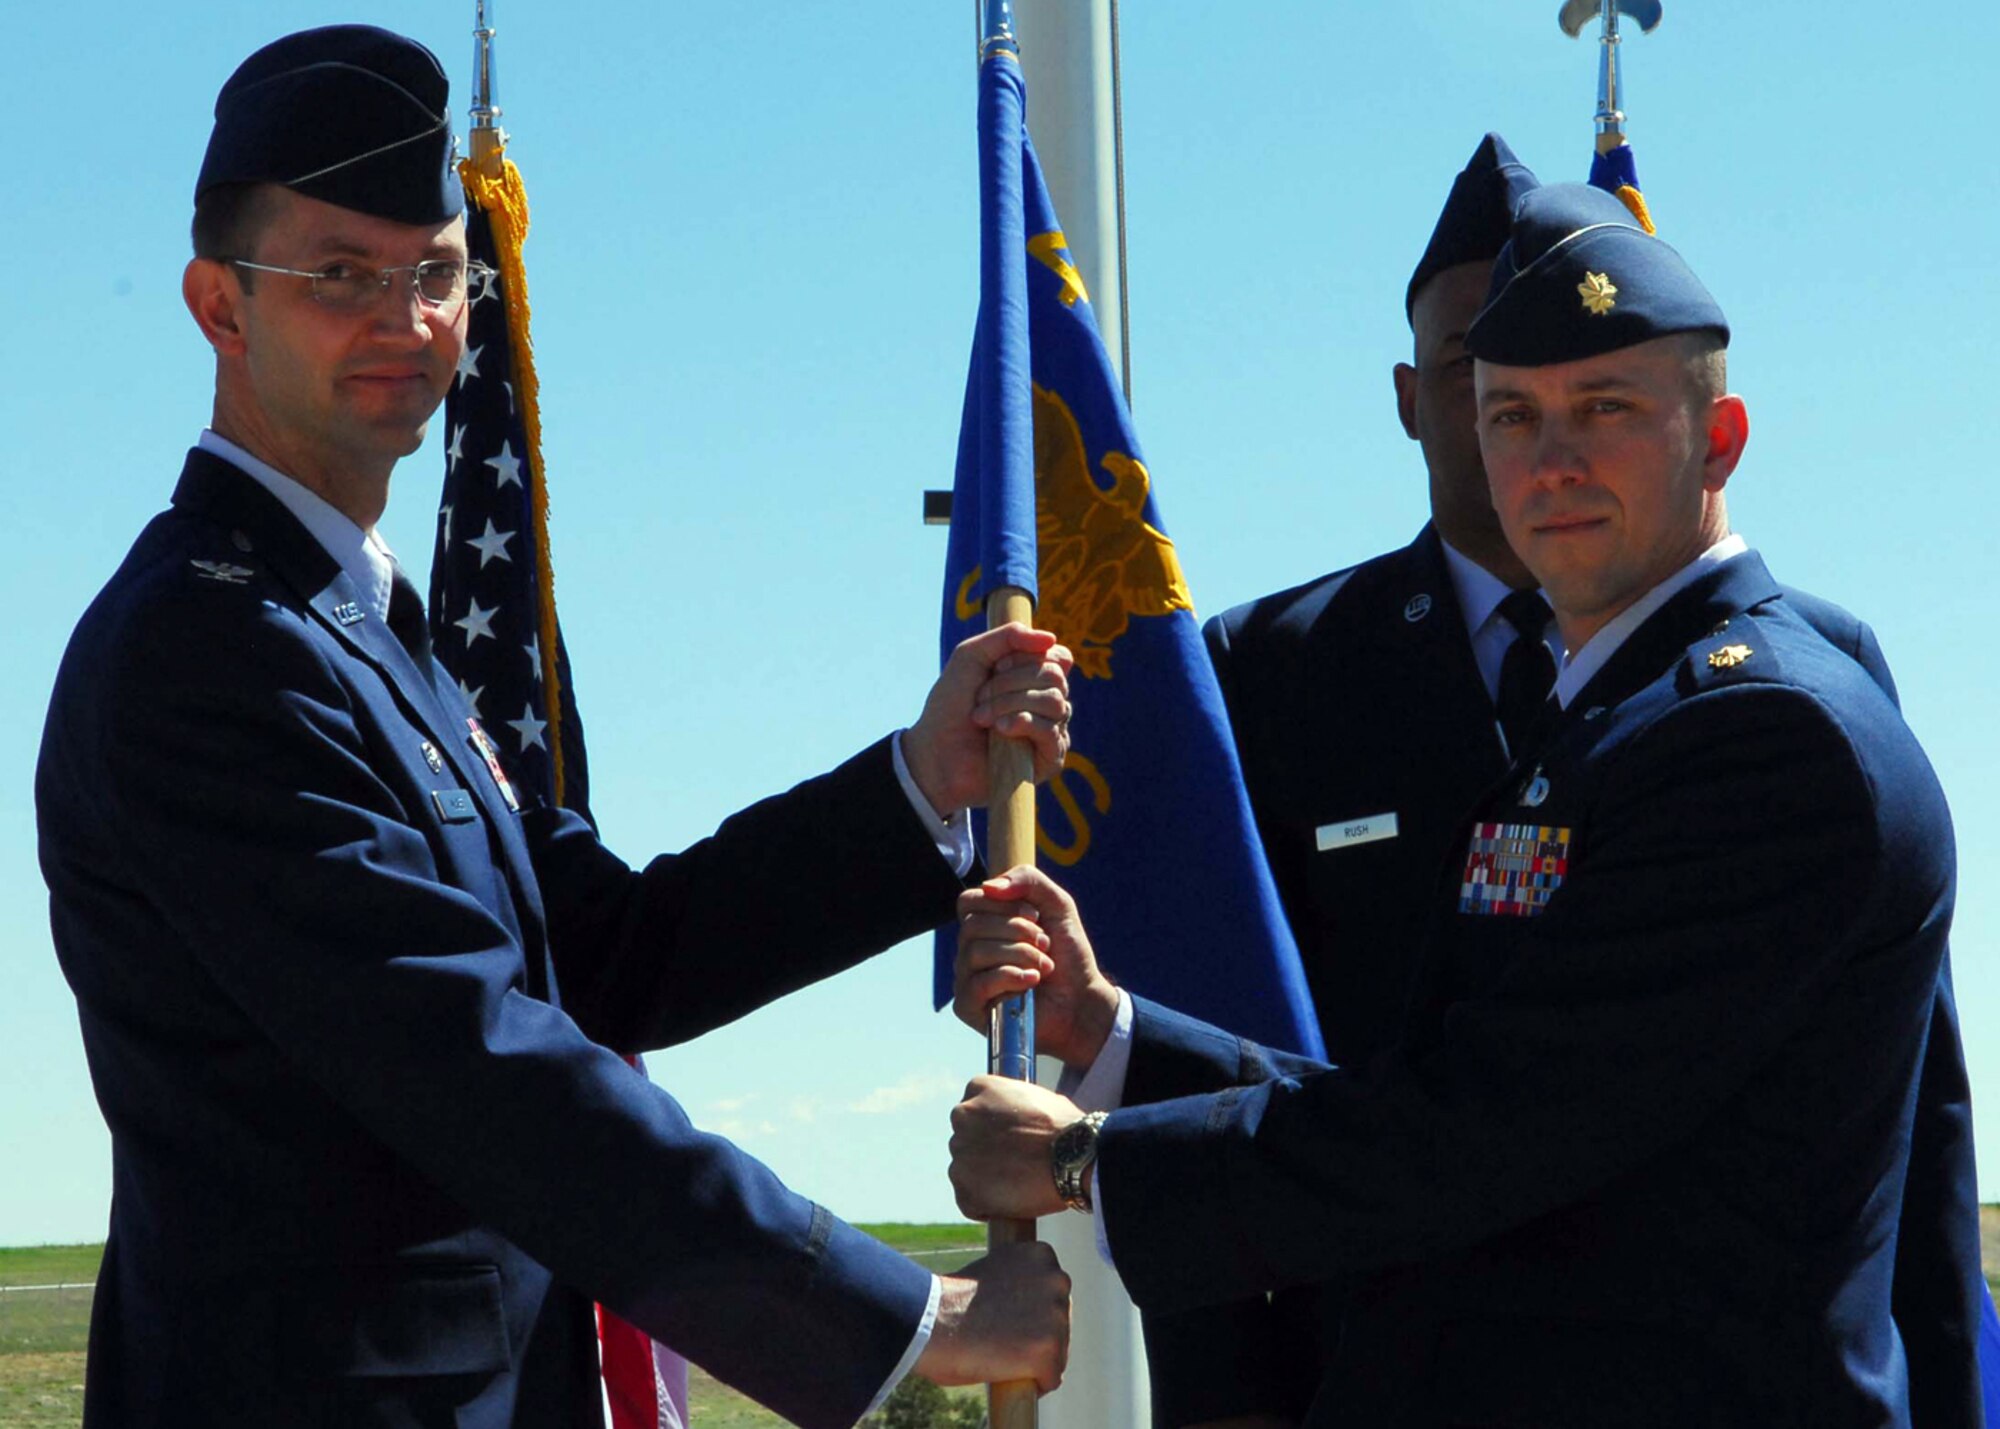 BUCKLEY AIR FORCE BASE, Colo. -- BUCKLEY AIR FORCE BASE, Colo. -- Maj. William Hunter assumes command of the 460th Comptroller Squadron from Col. Wayne McGee, 460th Space Wing commander, in a change of command ceremony here June 6. (U.S. Air Force photo by Airman 1st Class Alex Gouchnour)